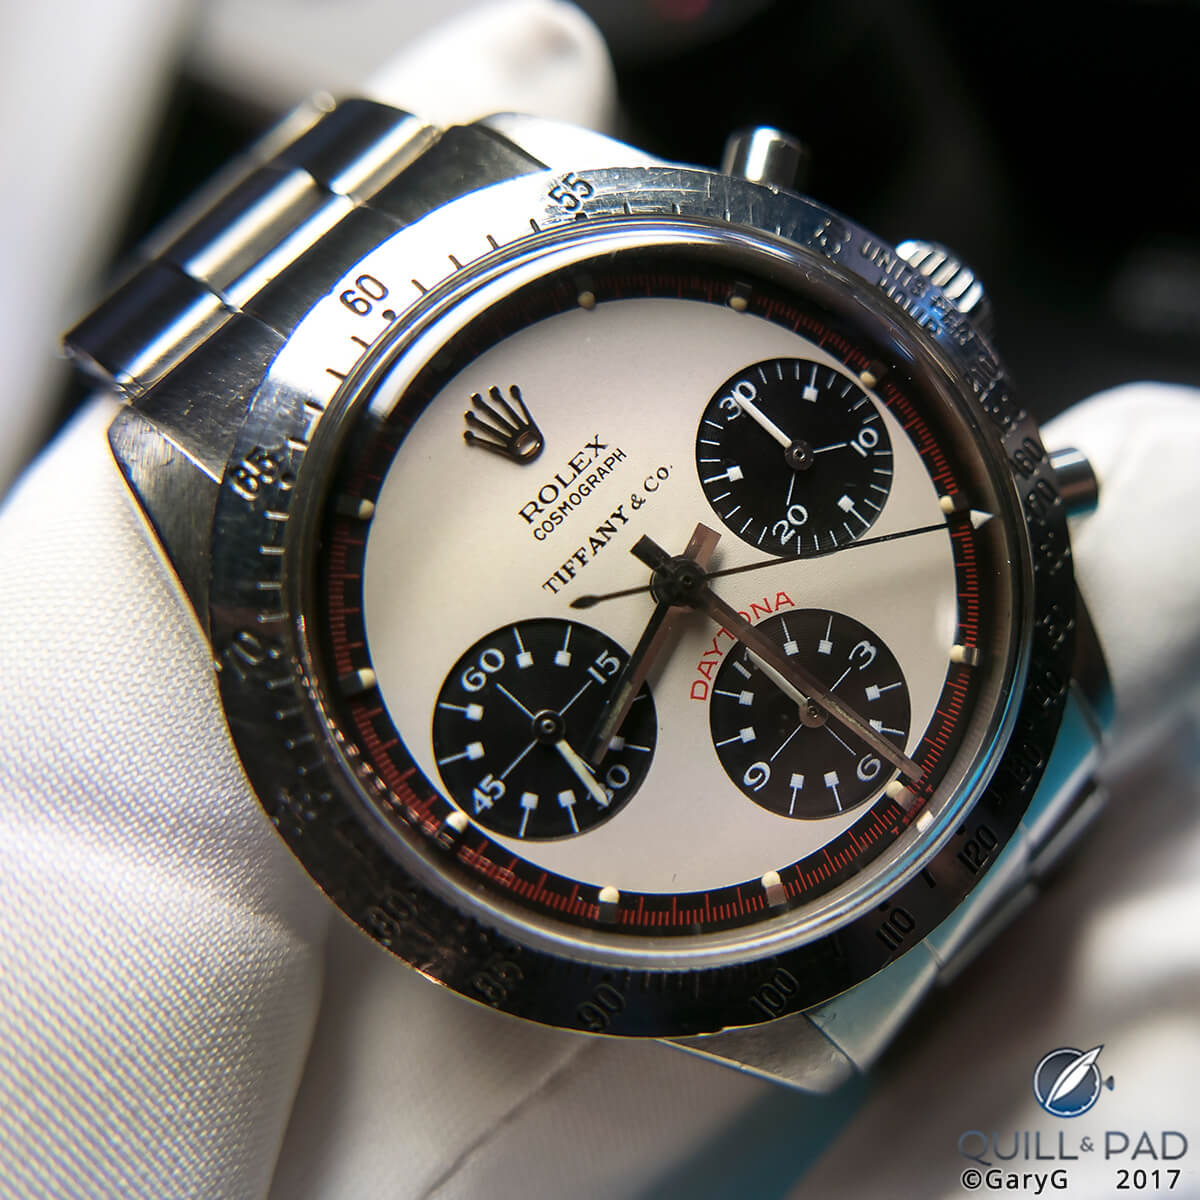 Rolex “Paul Newman” Daytona with characteristic subdial numerals and block indices, Tiffany and Co. dial